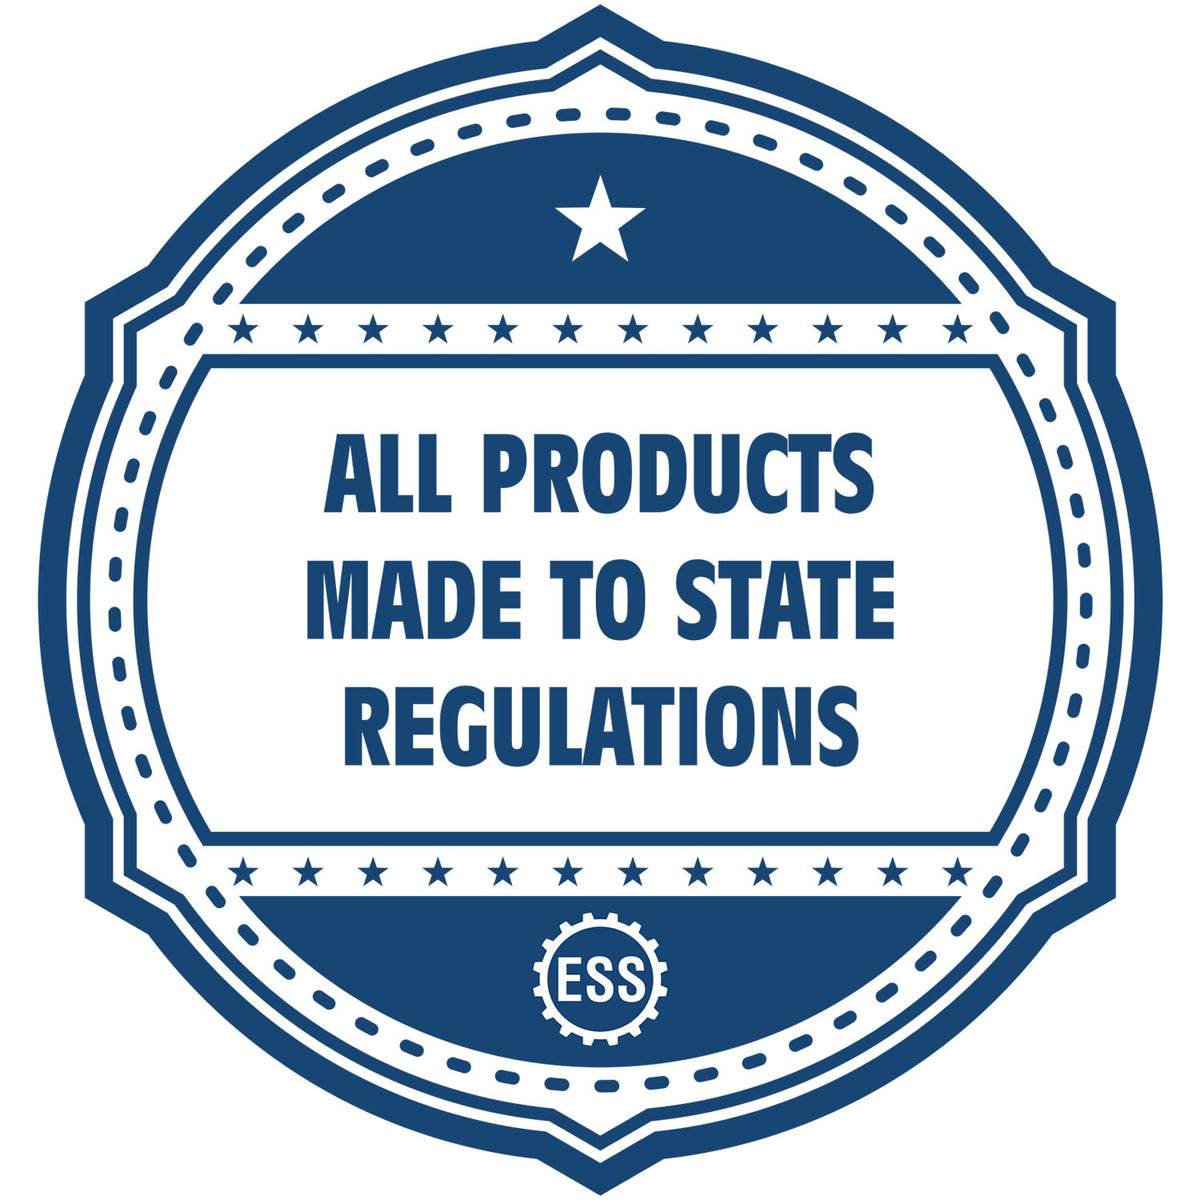 An icon or badge element for the Self-Inking Rectangular Puerto Rico Notary Stamp showing that this product is made in compliance with state regulations.